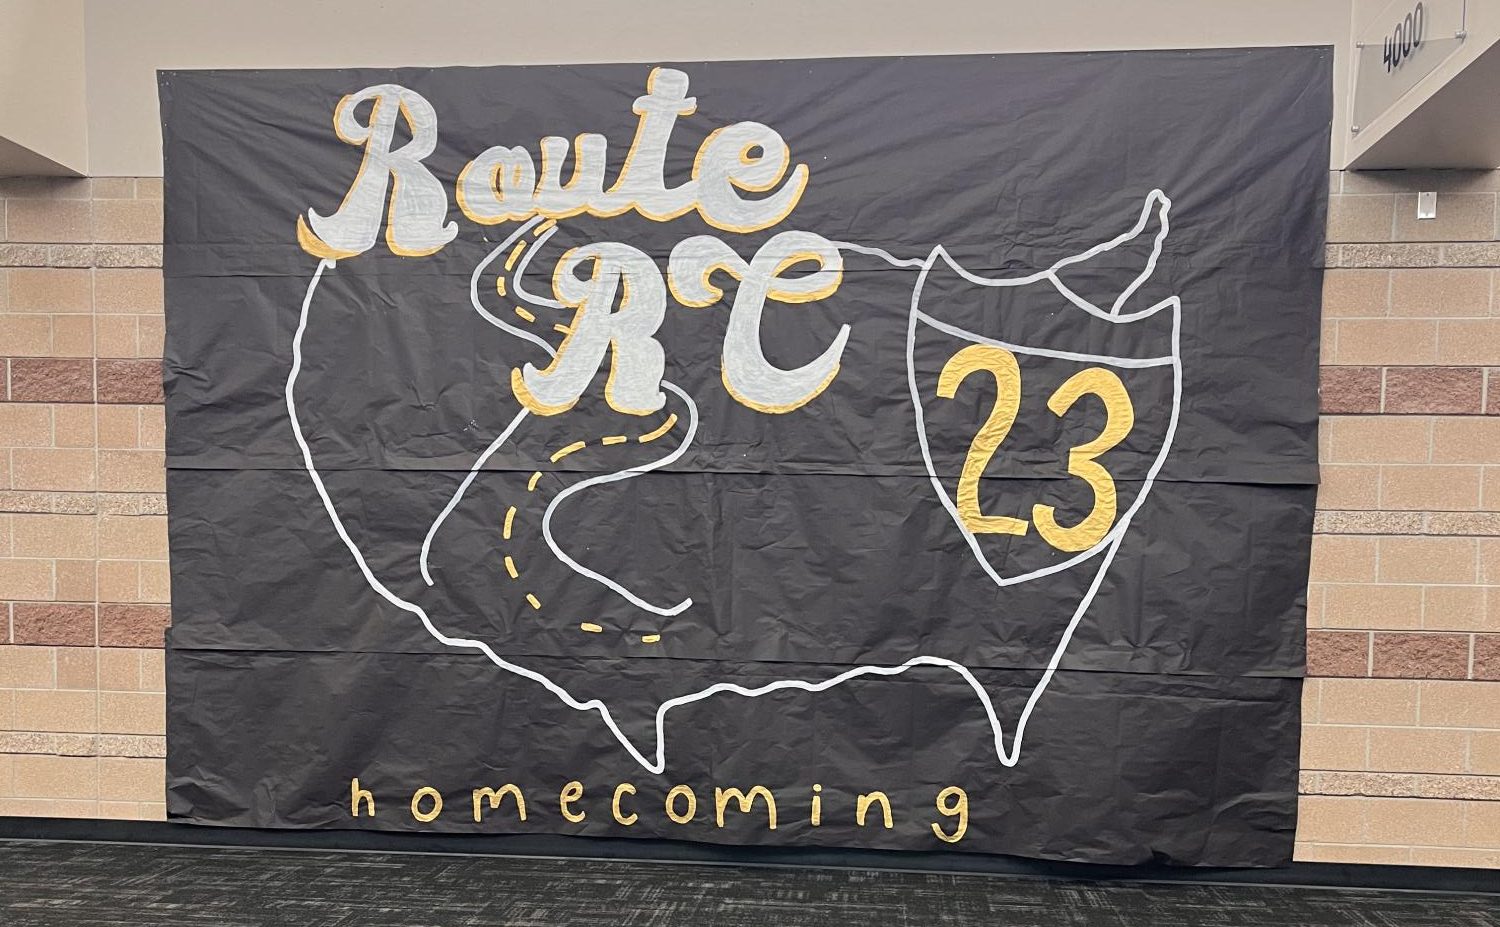 Outside the 4000s pod, a black paper banner painted with the words “Route RC 23 Homecoming” represents the overall theme for this years Homecoming Sept. 22. The other pods were decorated with specific locations from the road trip theme. “My favorite design this year is the banner. It is so innovative and [Student Council] really applied their artistic abilities in showcasing the road trips theme,” Veronica Baxter ‘25 said. 